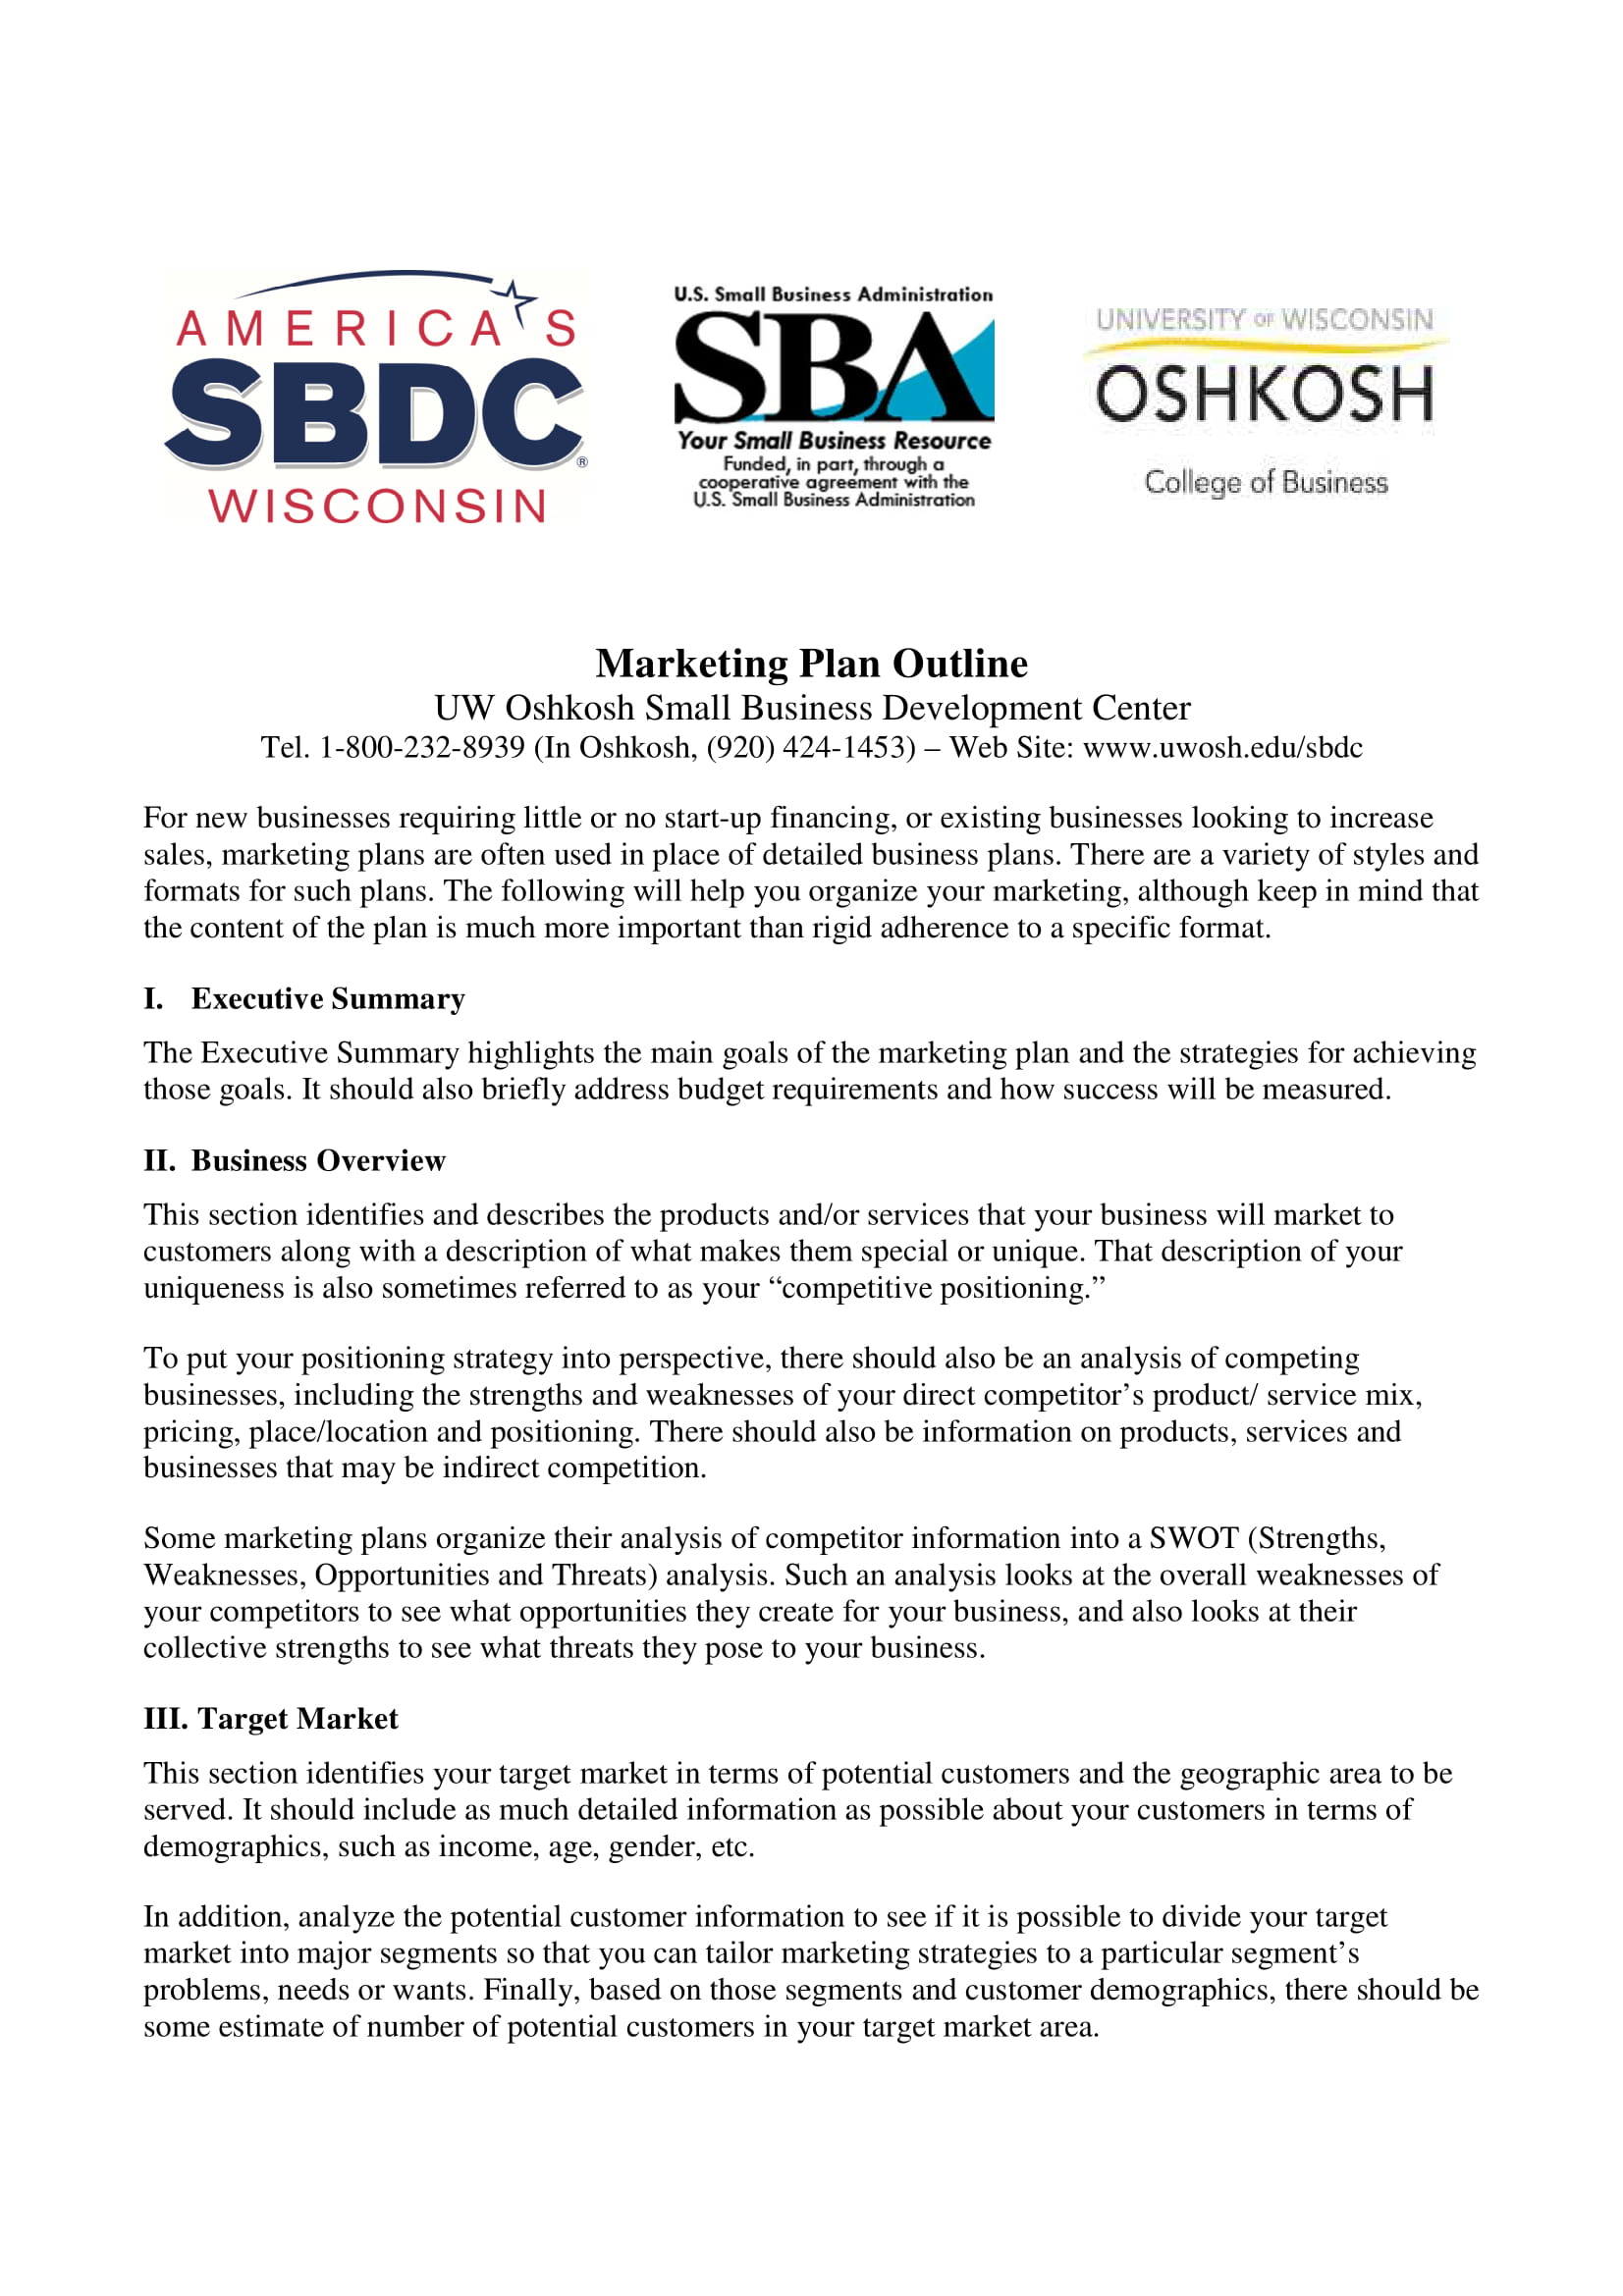 11 Simple Marketing Plan Examples - PDF | Examples